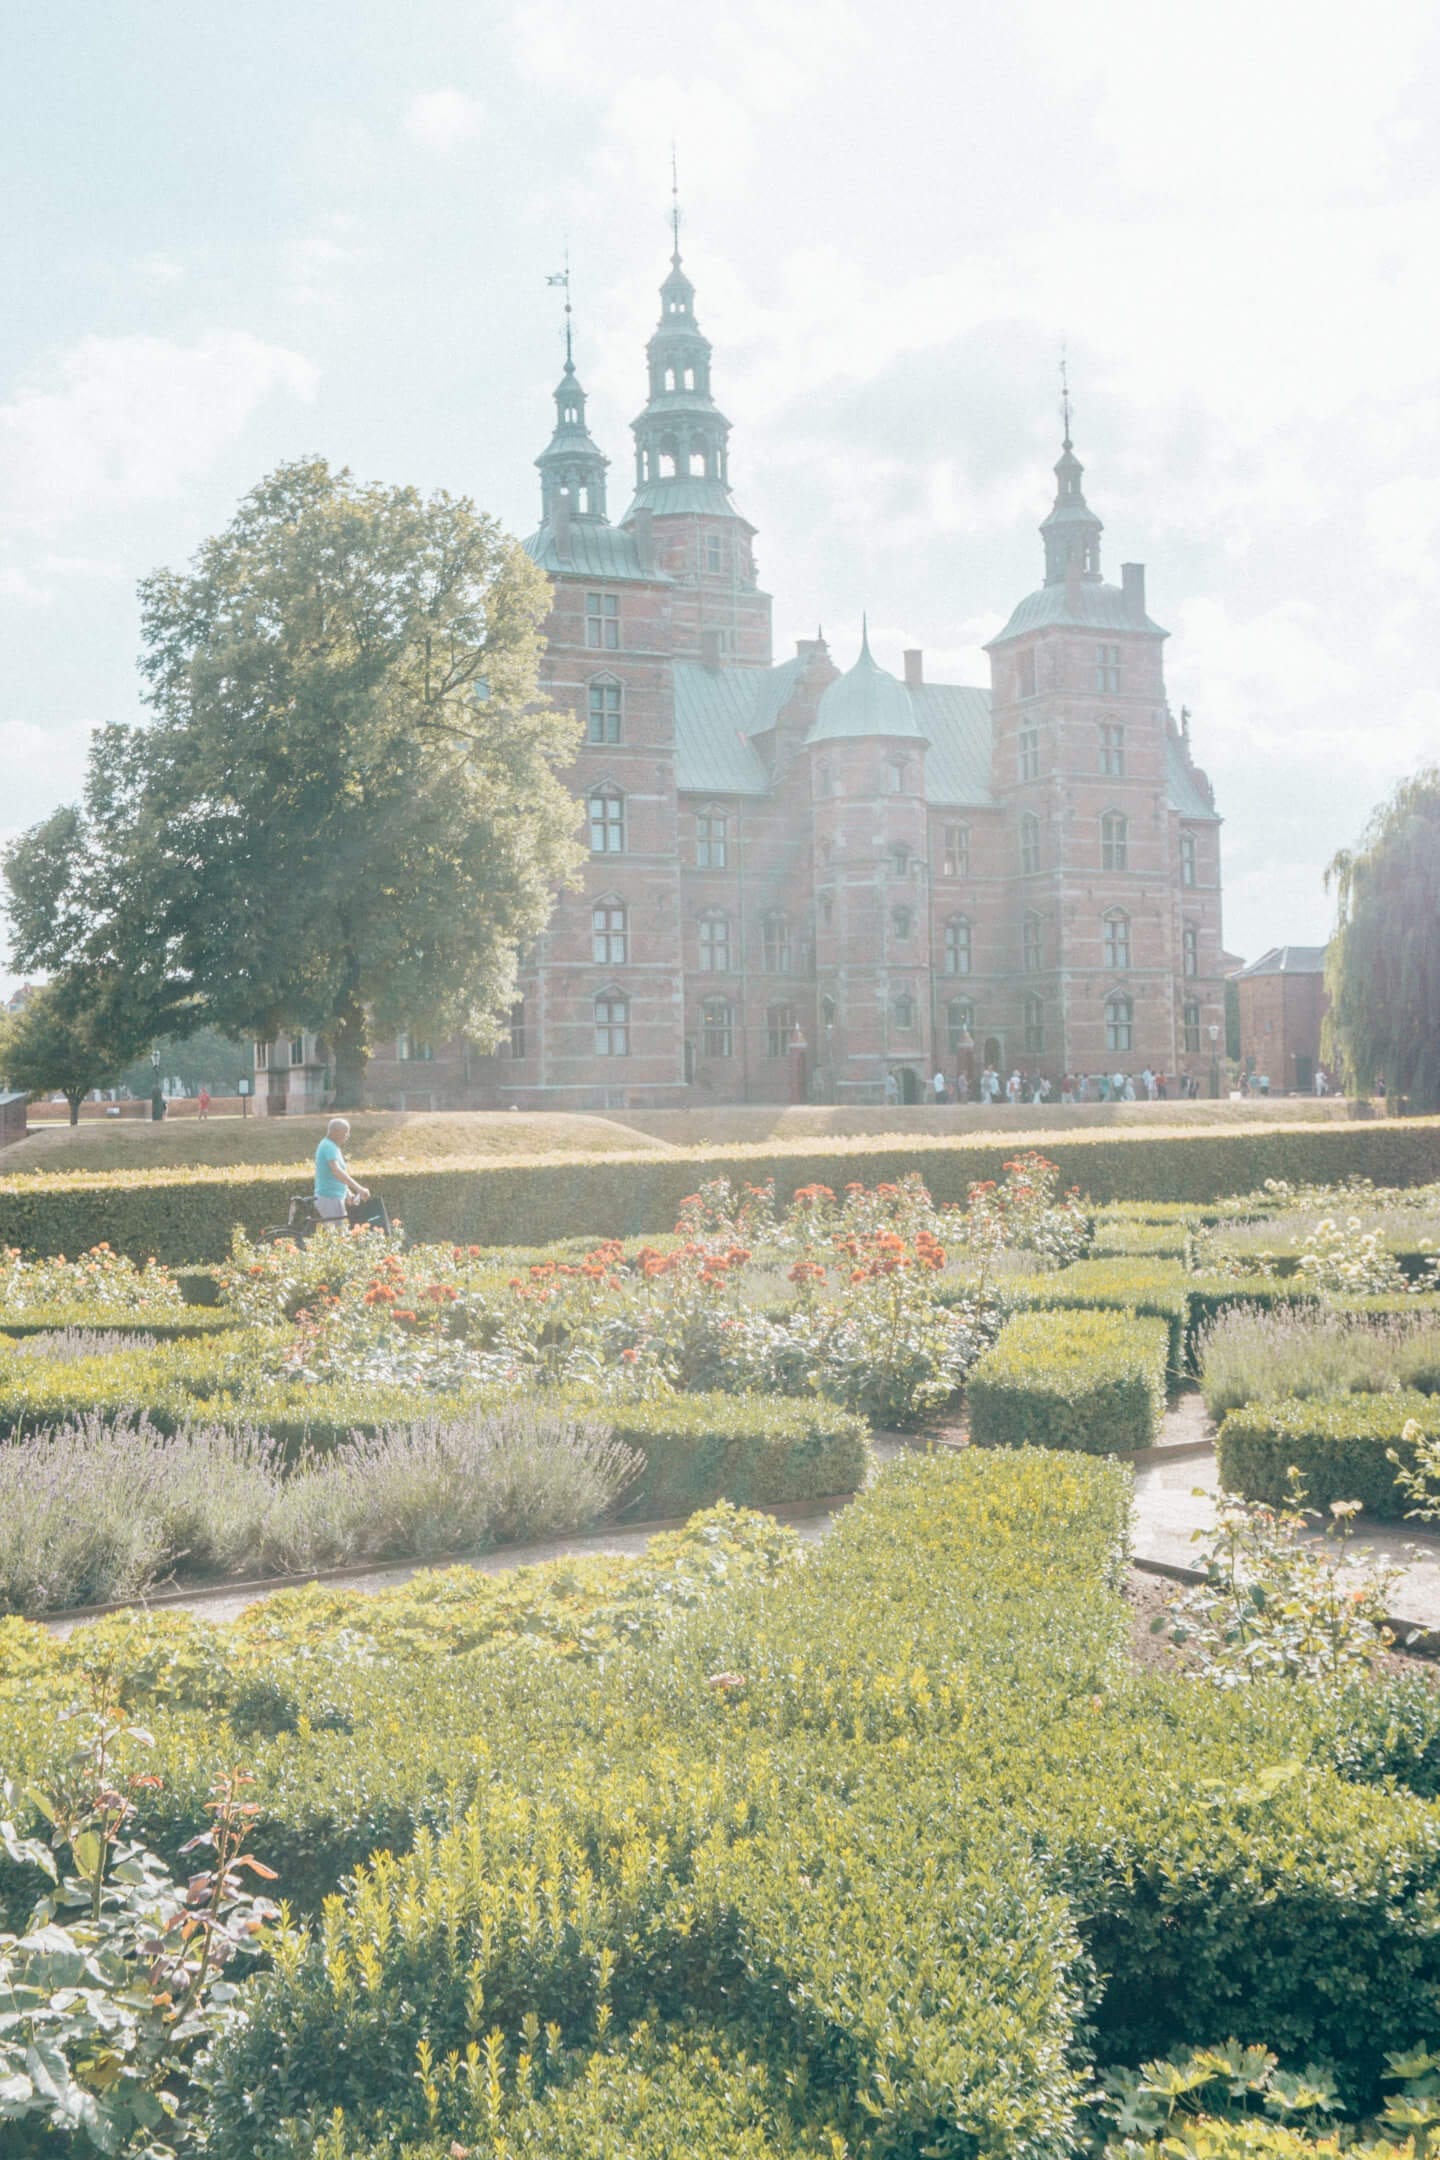 A Blissful #Copenhagen Itinerary: 4 Days for First-Time Visitors - Rosenborg Castle and gardens